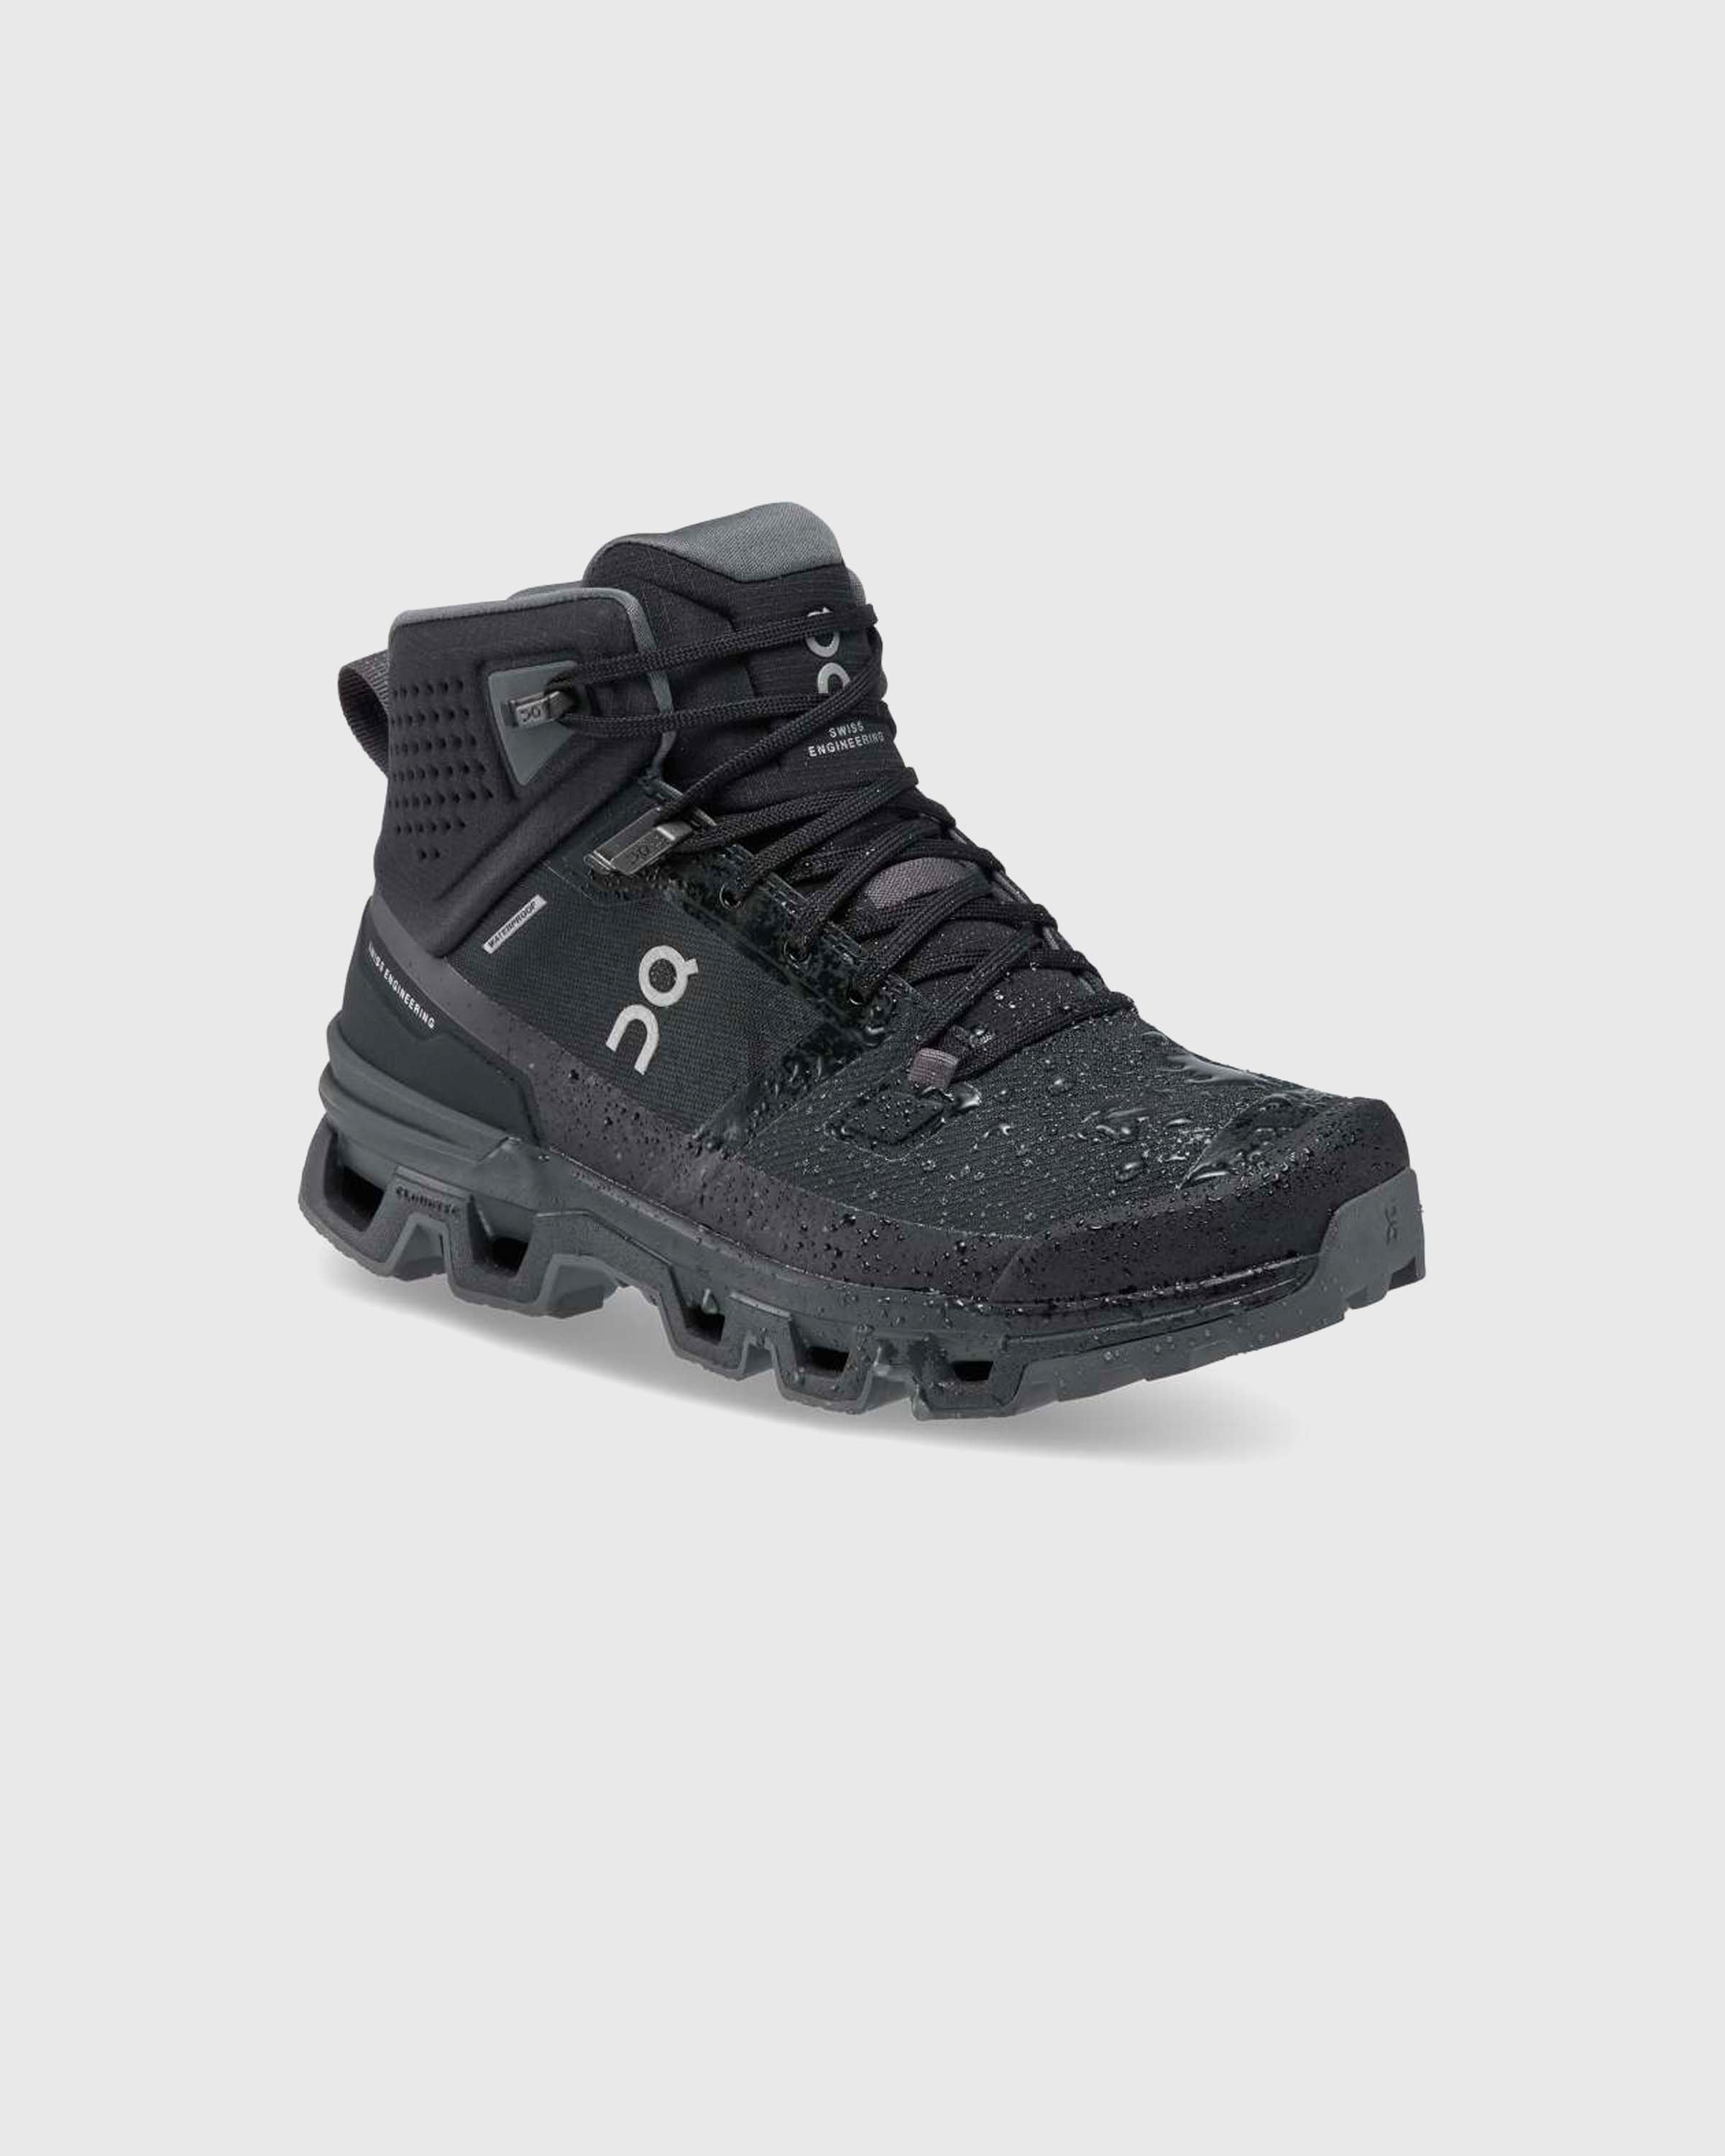 On – Cloudrock 2 Waterproof Black/Eclipse - Hiking Boots - Black - Image 3